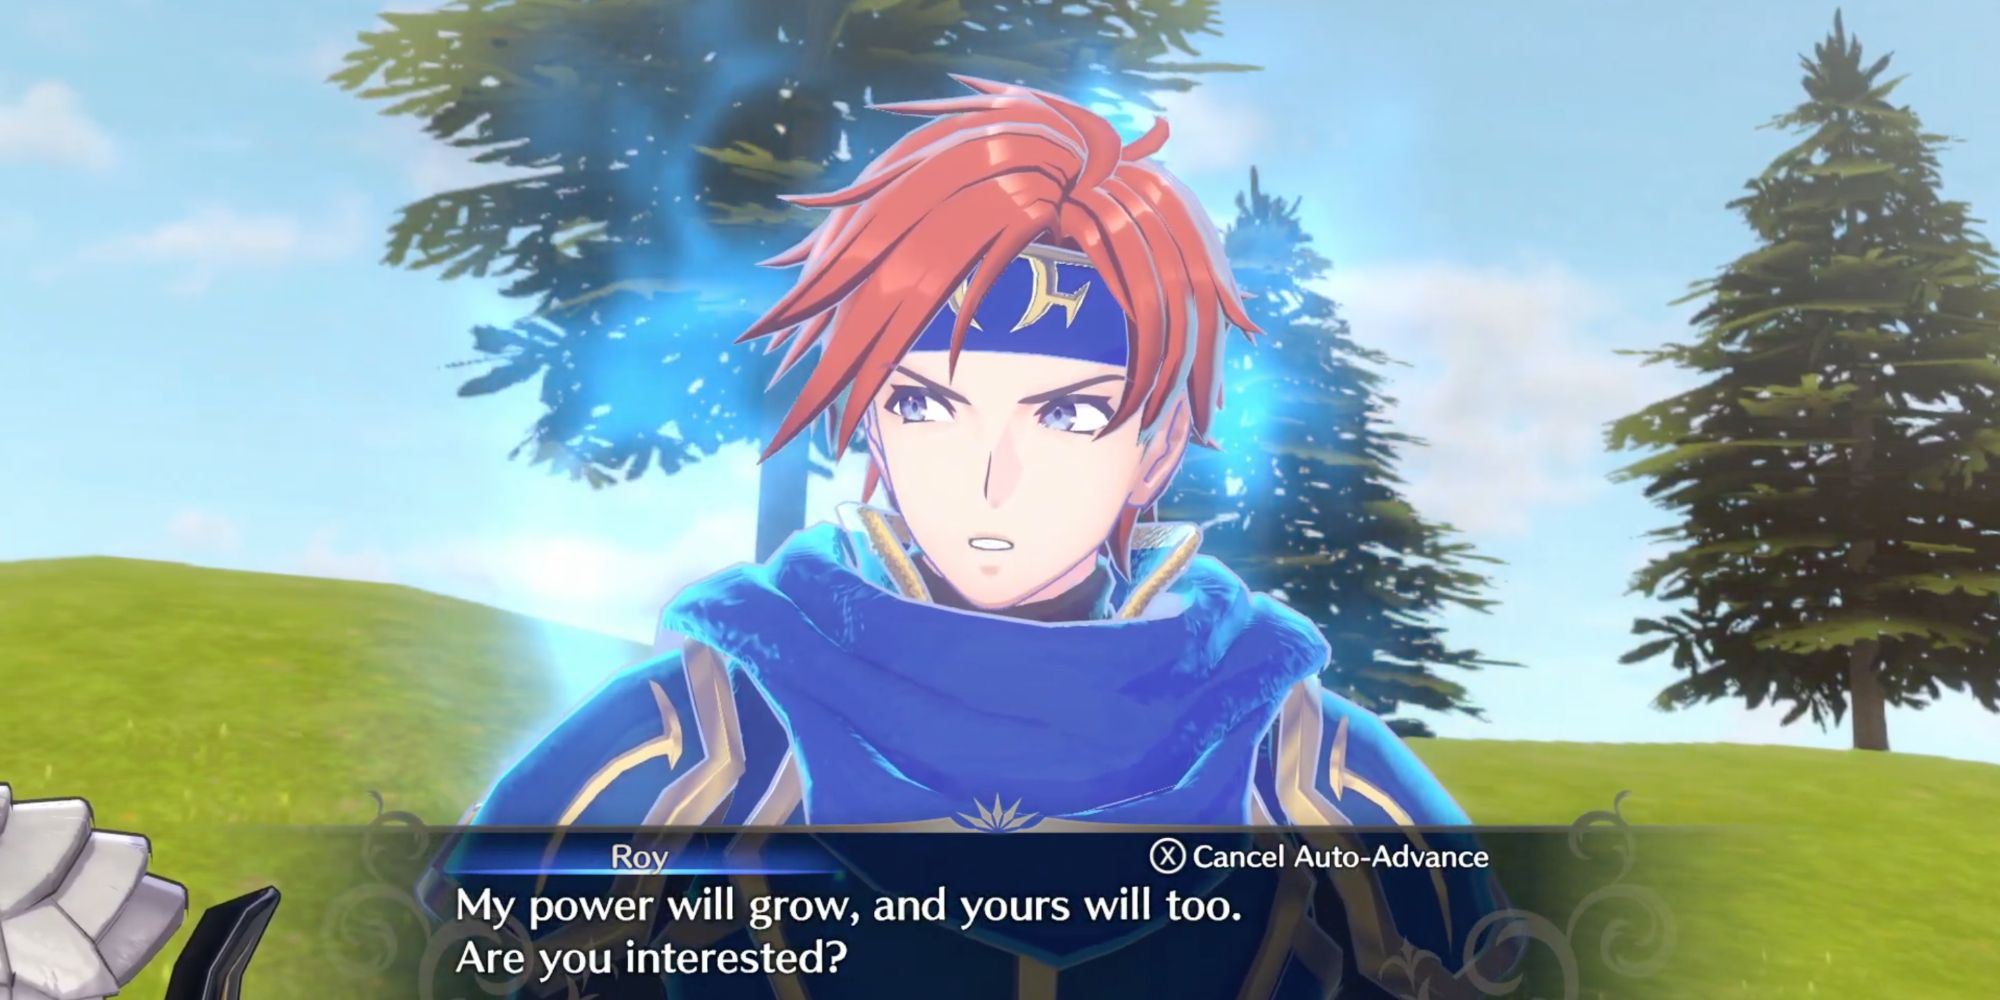 Roy wants to share his power with Alear